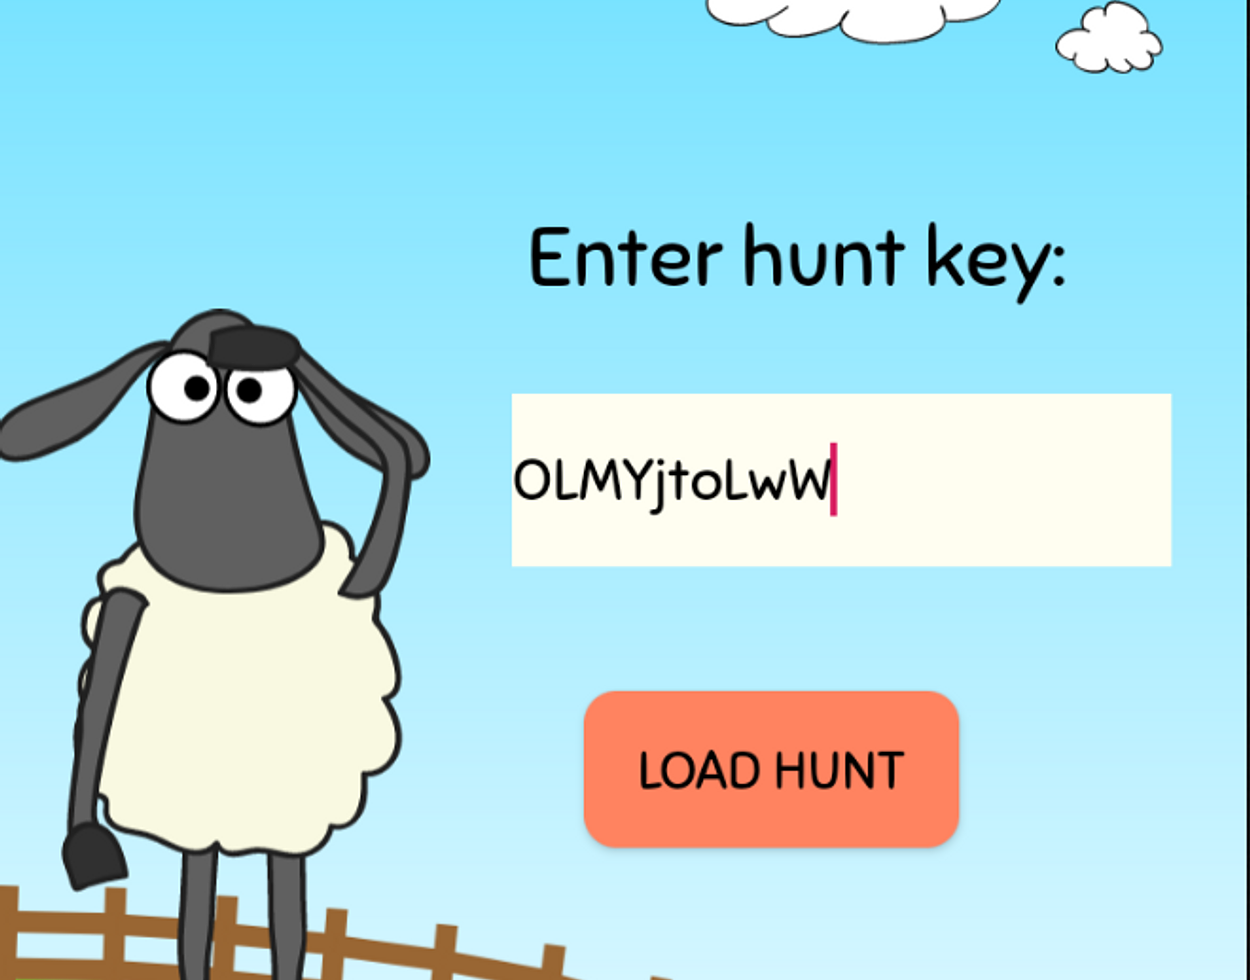 Enter a authentication key (received from the hunt on the website) into the app to load the corresponding hunt. 